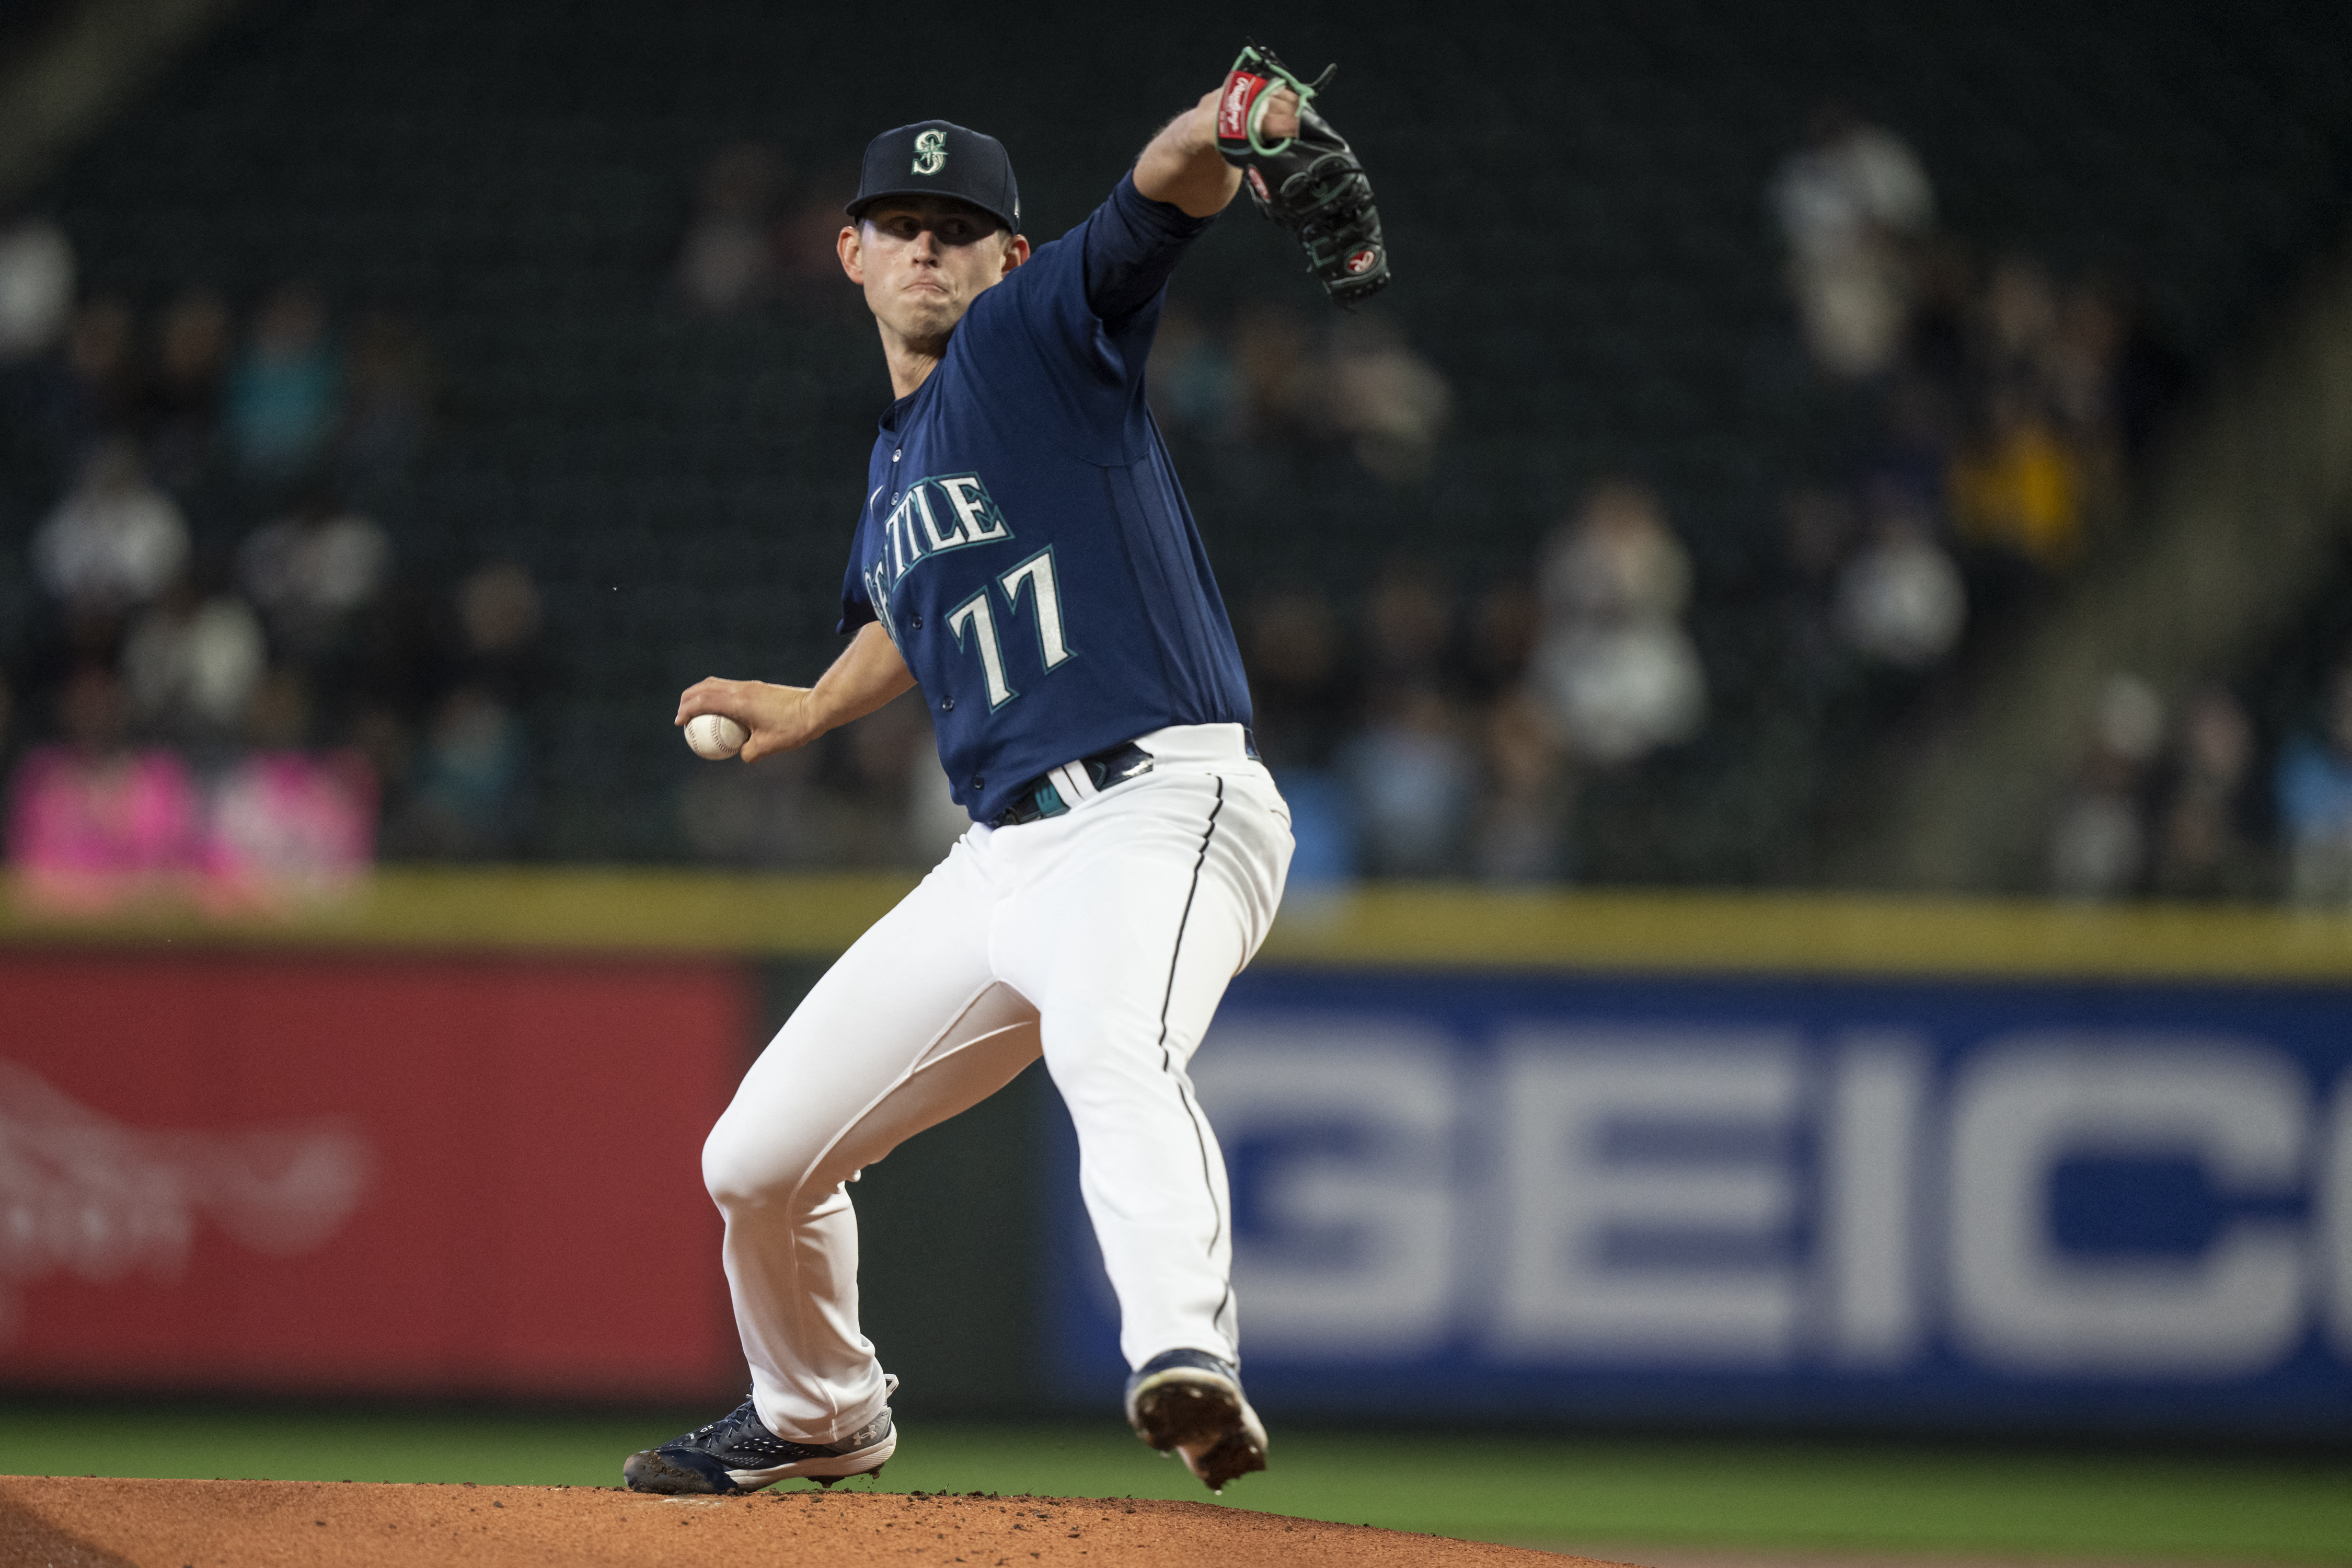 Brewers ace Corbin Burnes leaves game with pectoral strain